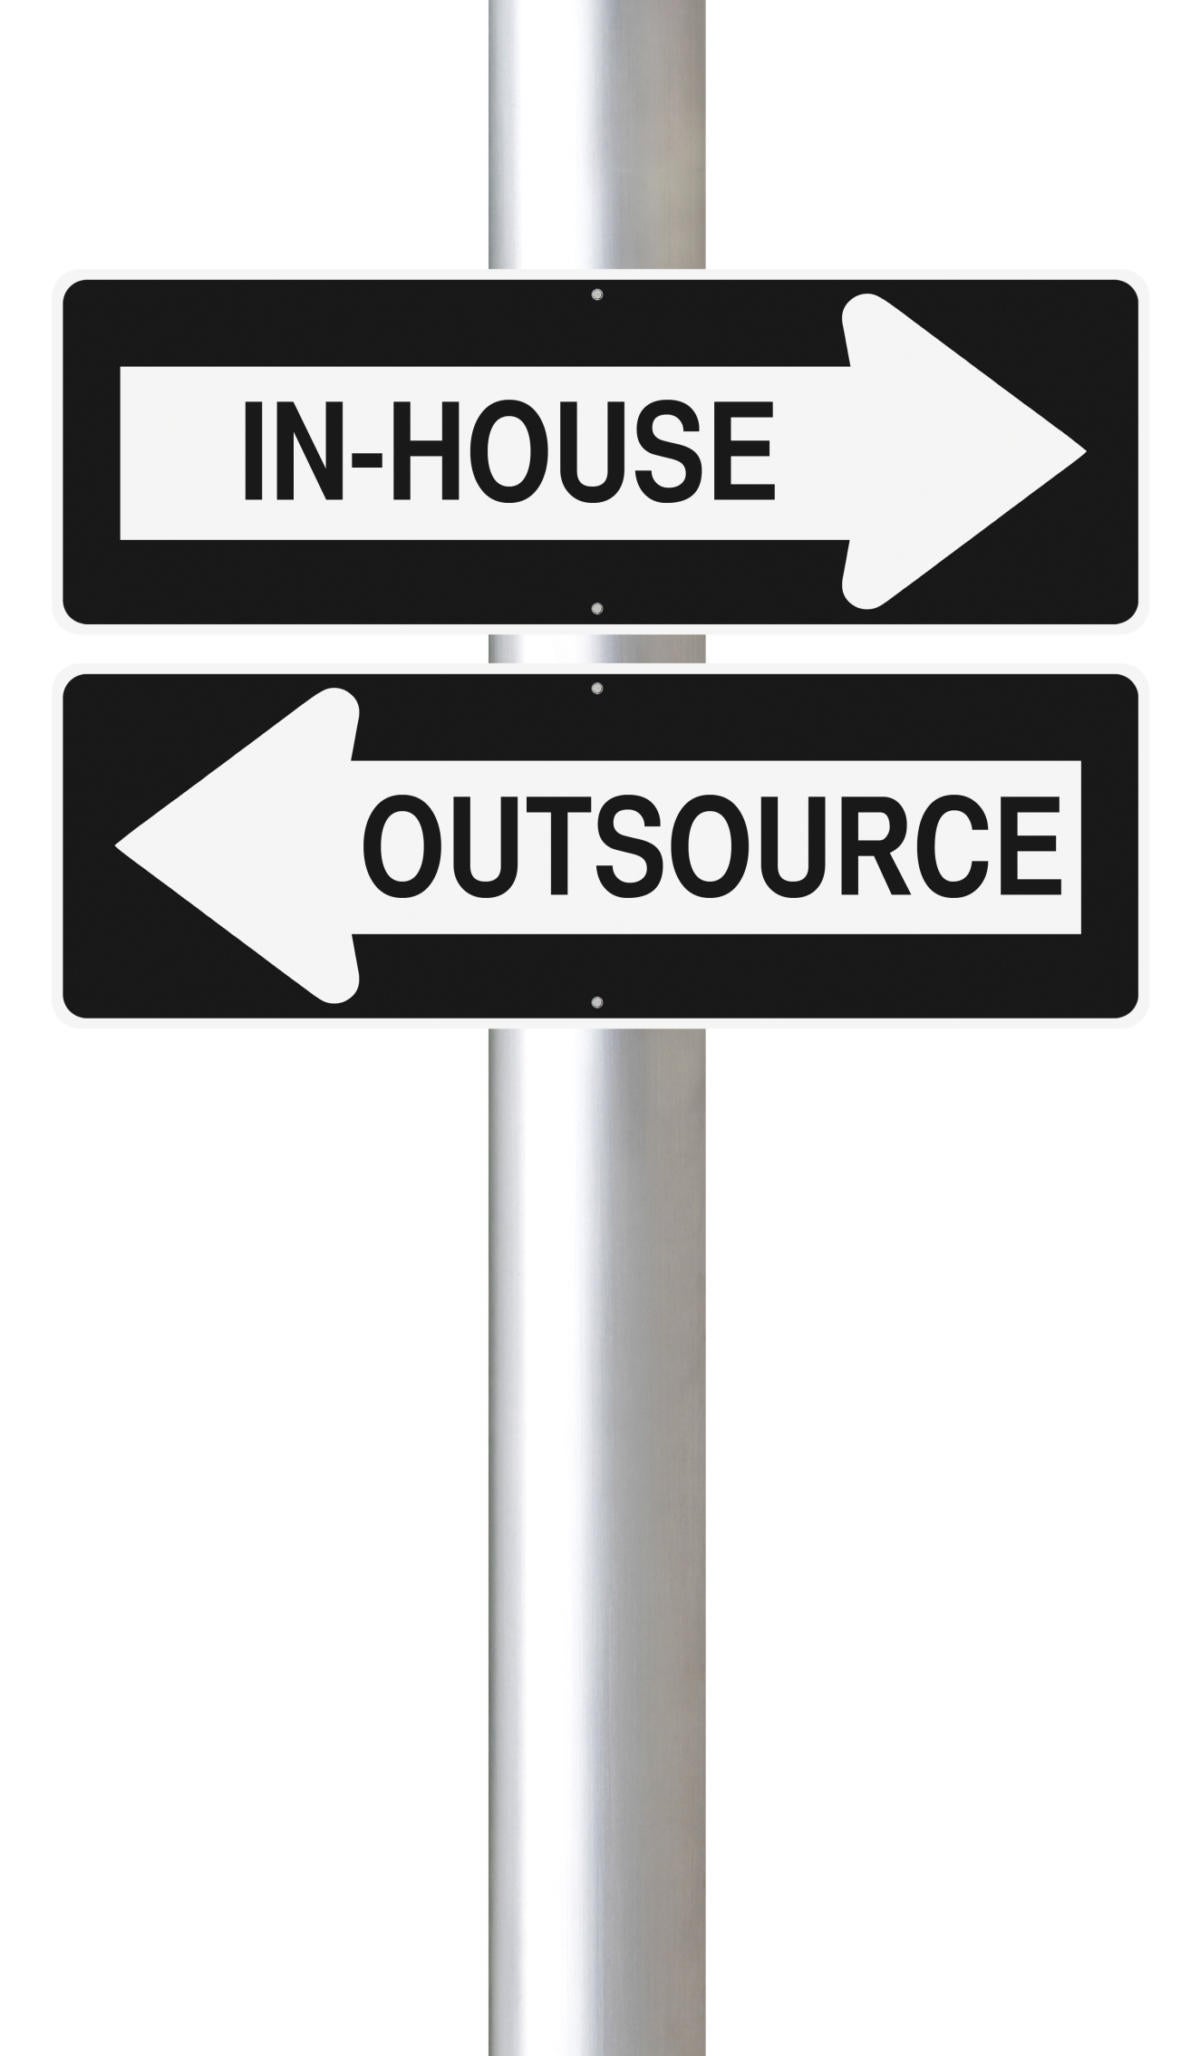 inhouse outsourcing thinkstock